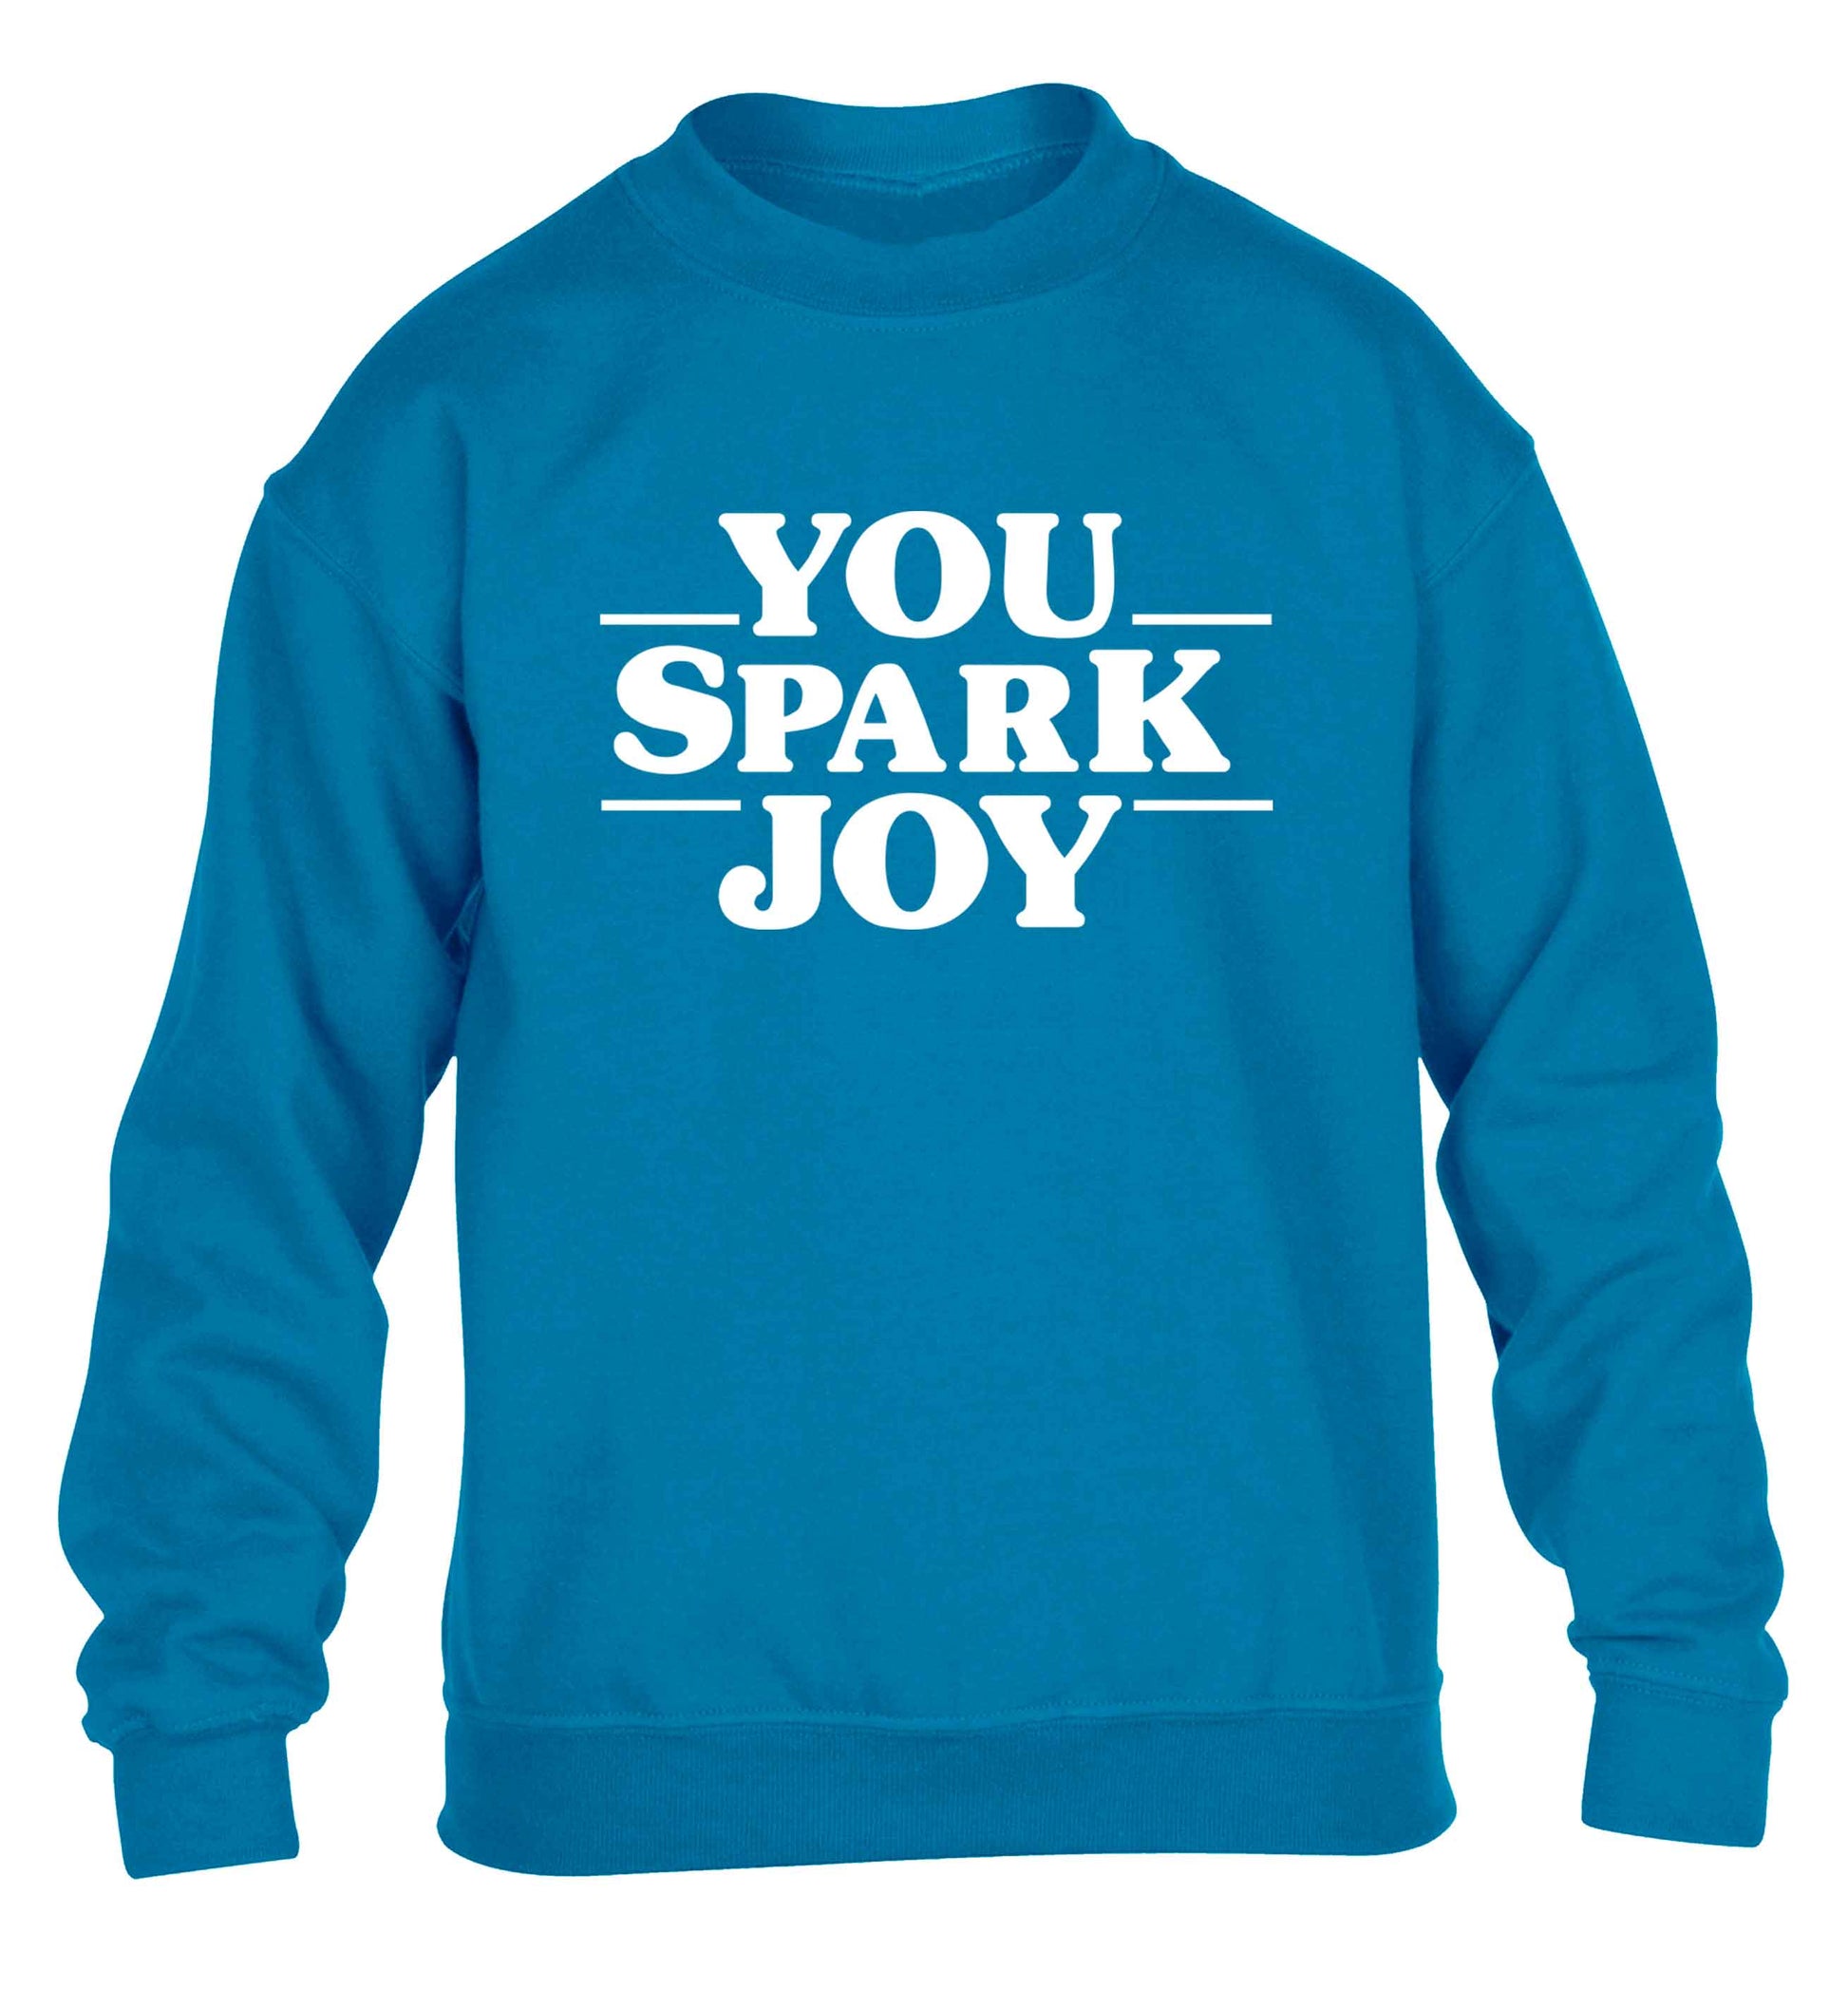 You spark joy children's blue sweater 12-13 Years